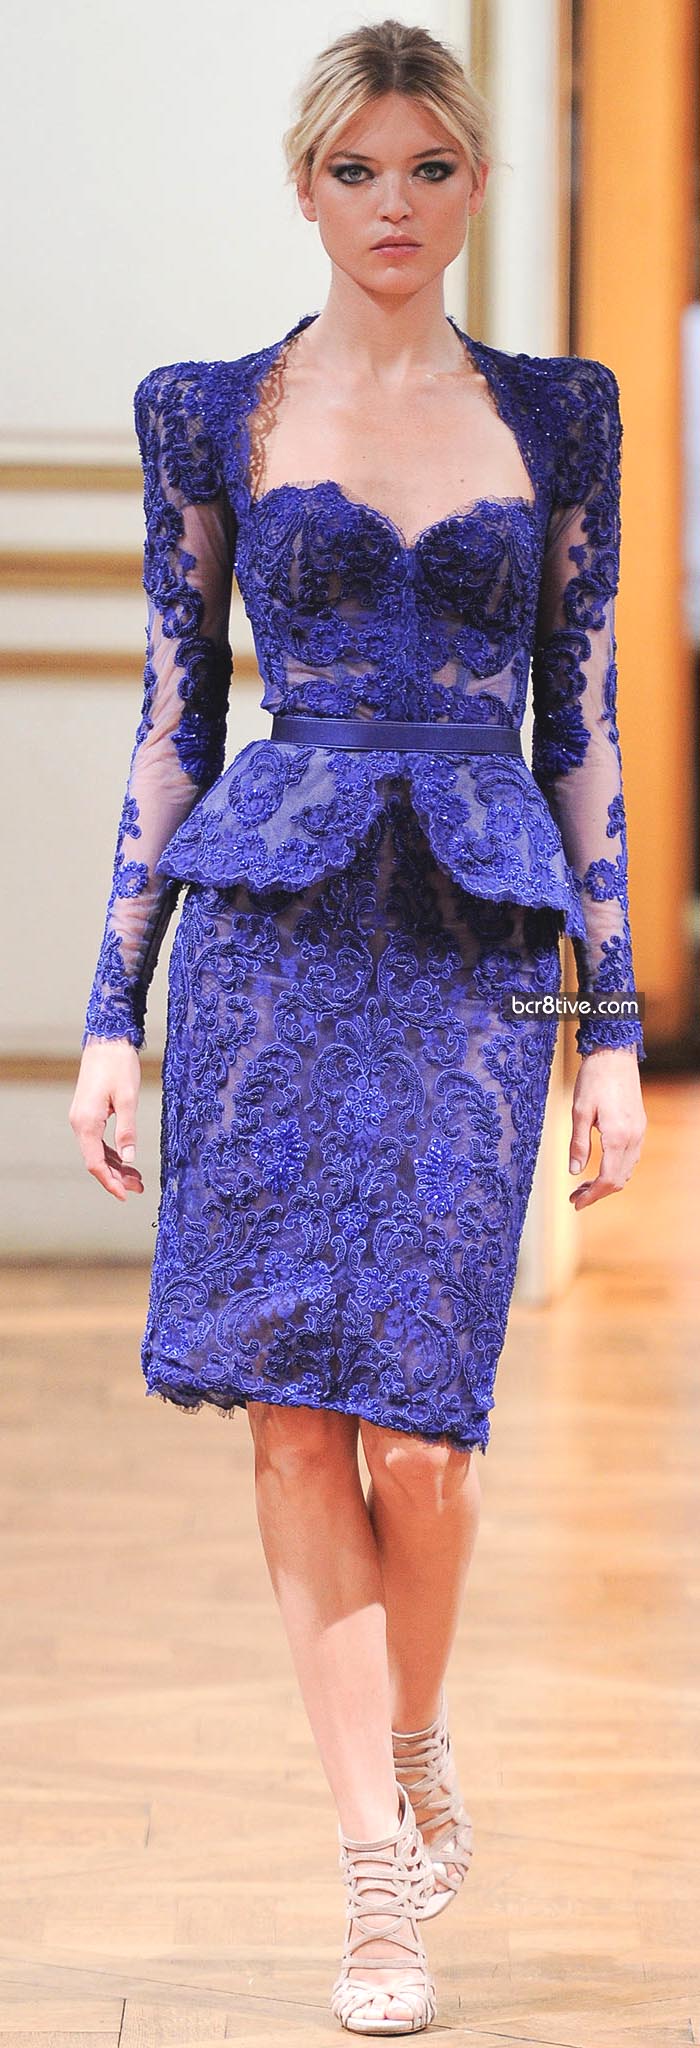 Zuhair Murad Fall Winter 2013-14 Haute Couture Collection